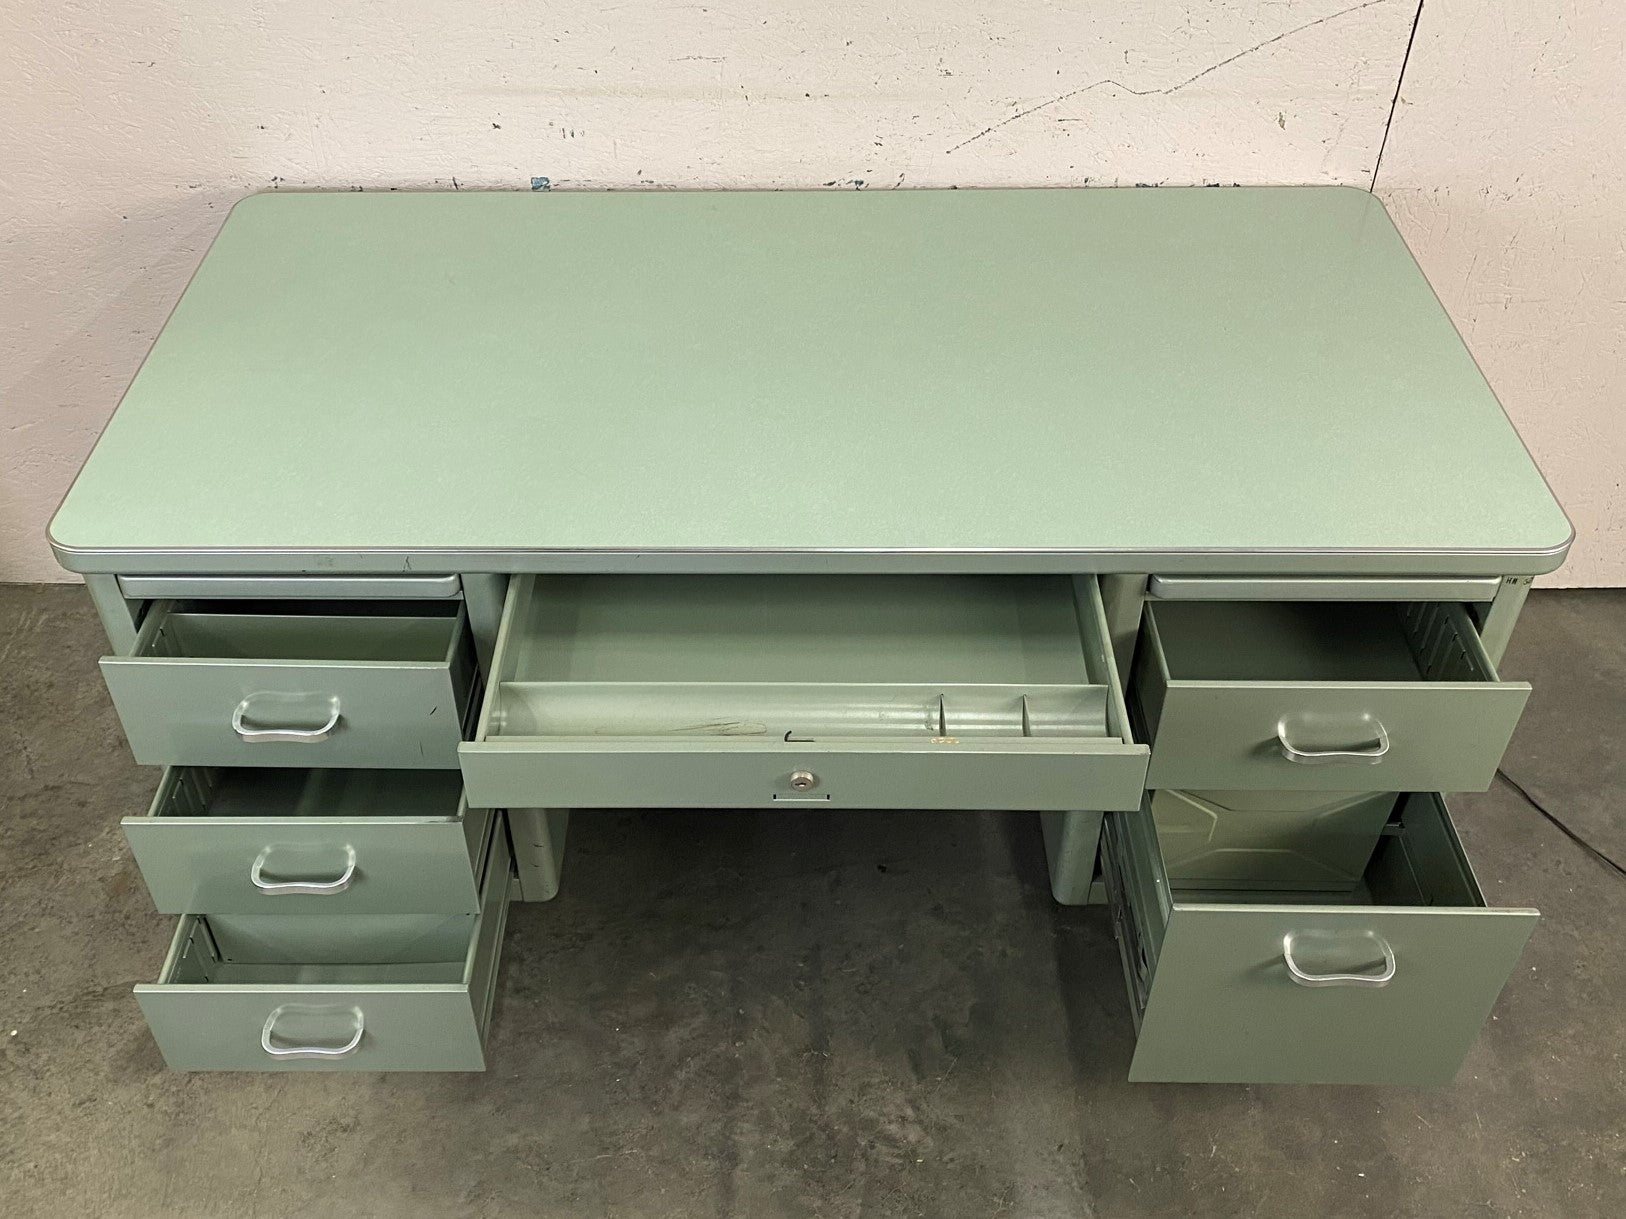 Steelcase Green 6-Drawer Tanker Desk with Green Top